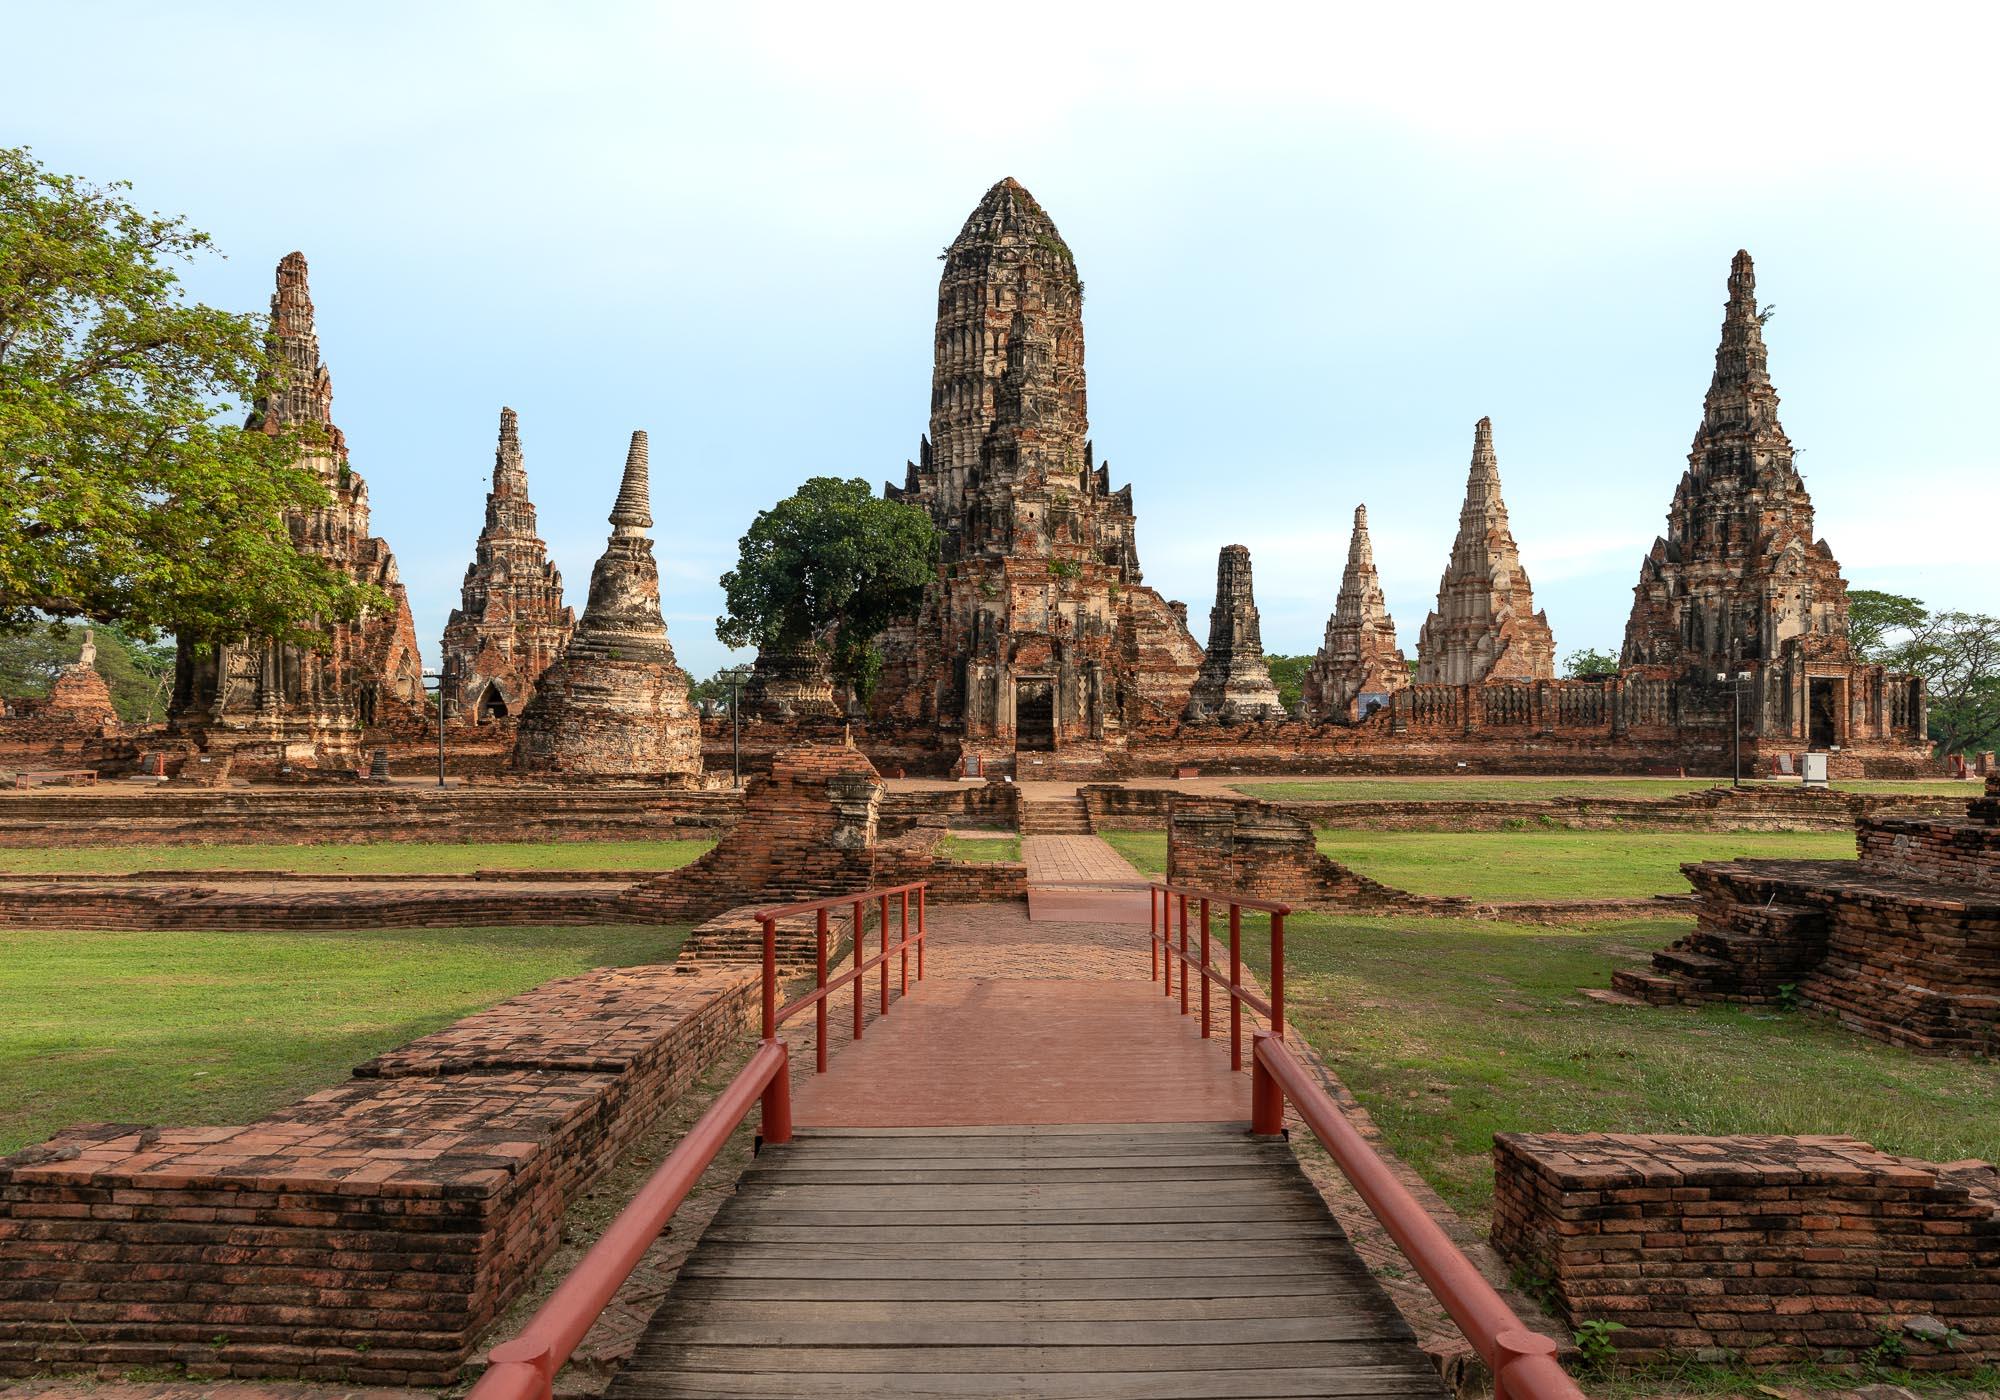 Although it isn't on the main island, Wat Chaiwatthanaram is considered to be one of the masterpieces of temple architecture in Ayutthaya. – © Michael Turtle